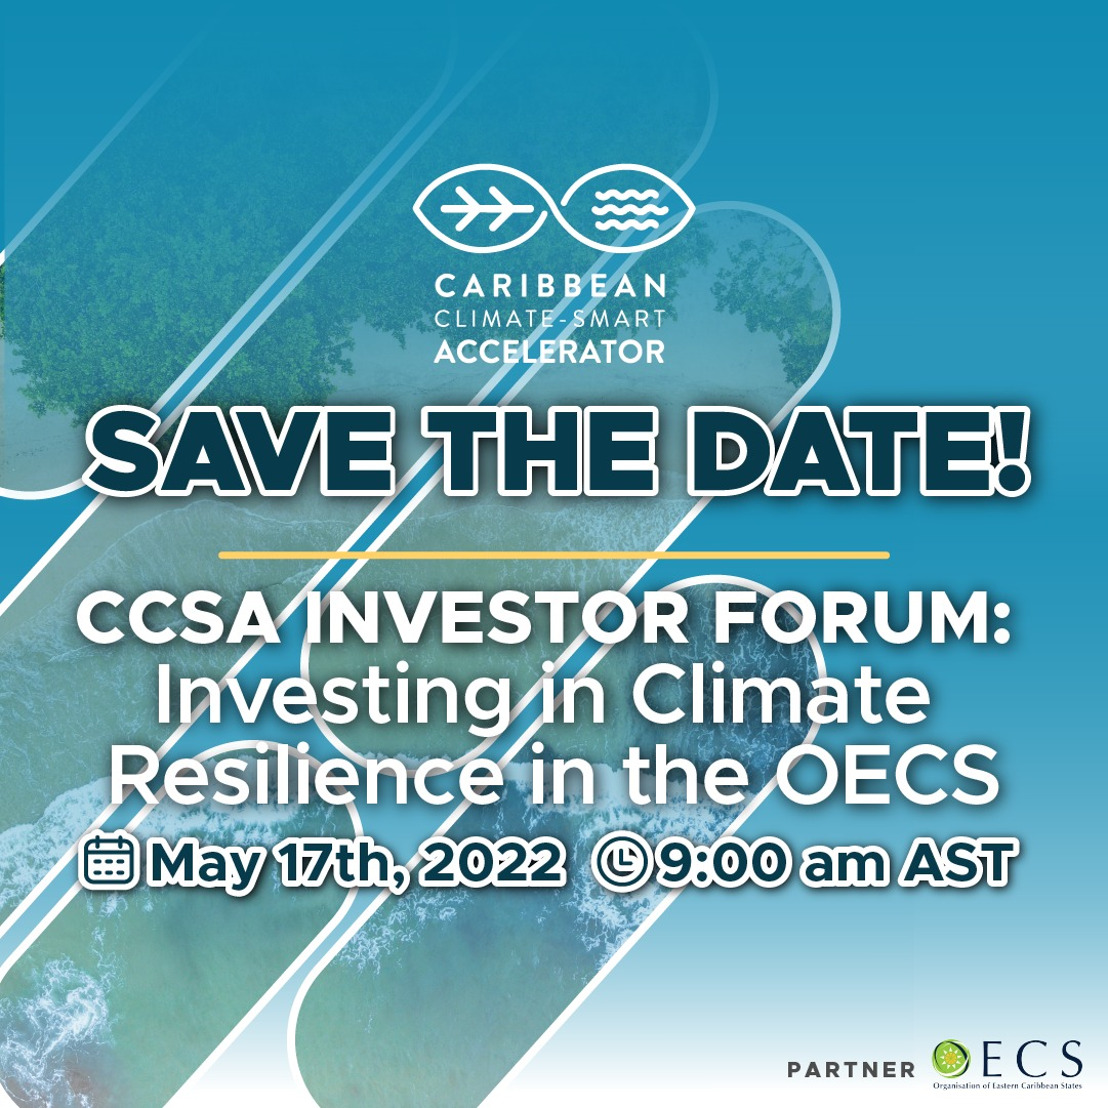 OECS partners with CCSA for Investor Forum on 17th May 2022